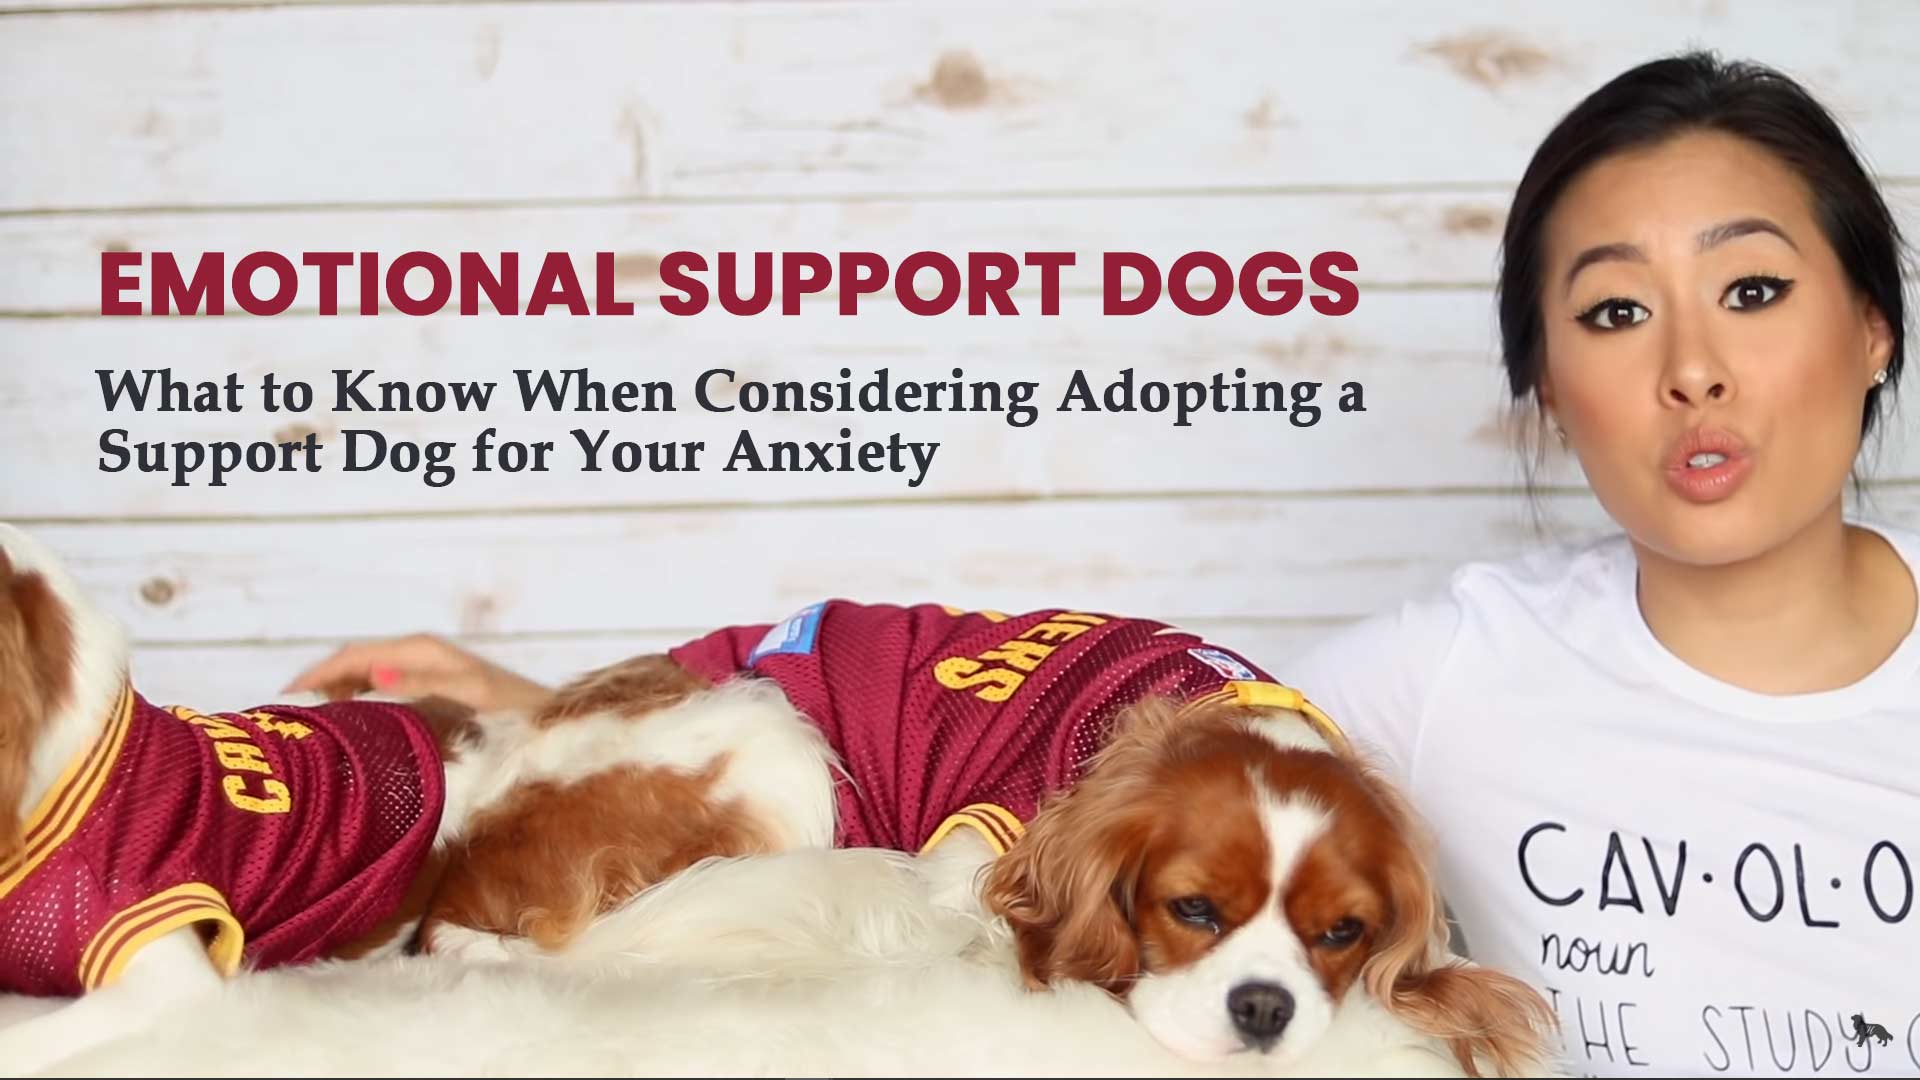 What to Know When Considering Adopting a Support Dog for Your Anxiety